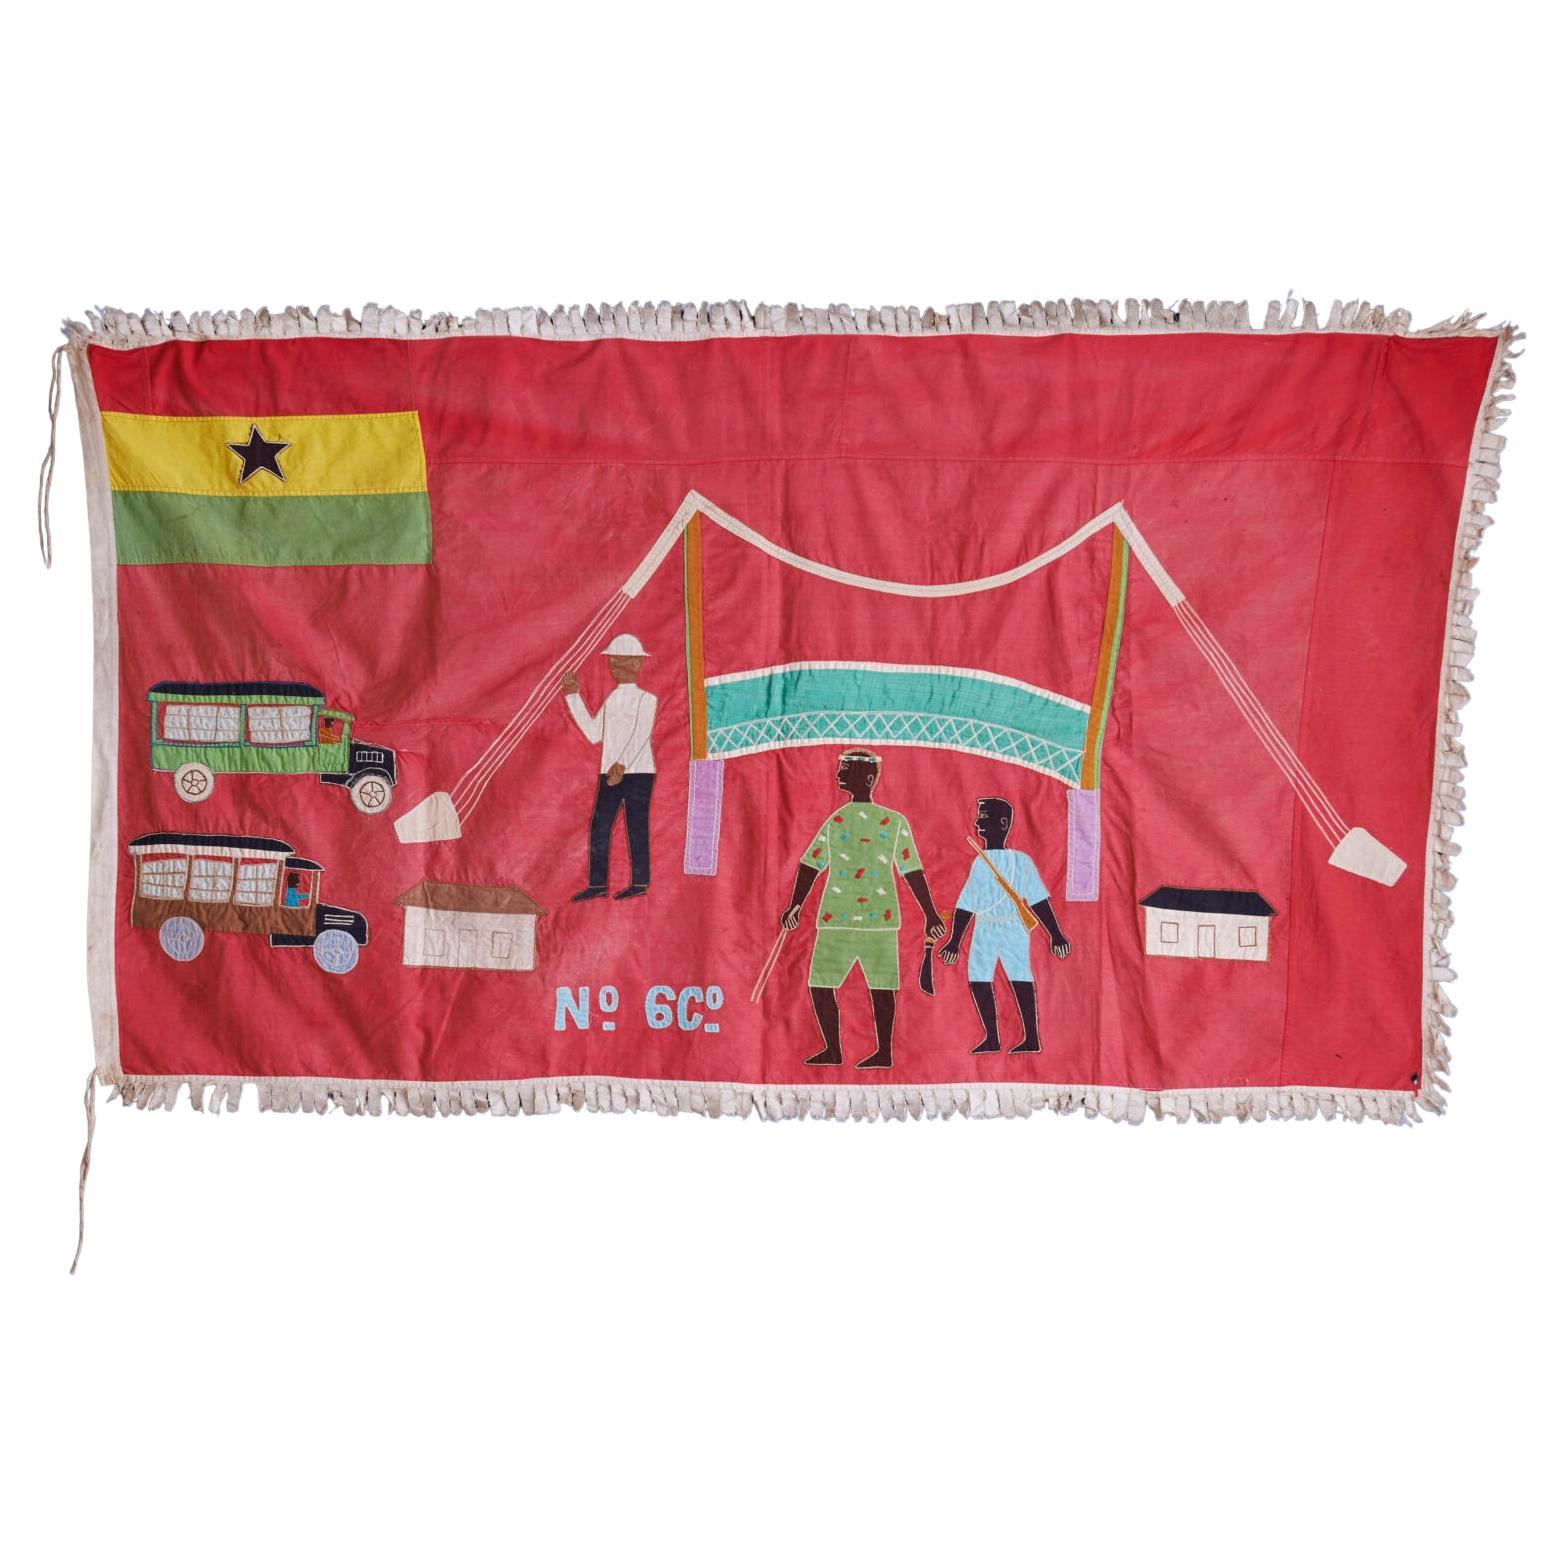 Vintage Asafo Flag in Pink Cotton Appliqué Pattern by Fante People, Ghana, 1960s For Sale